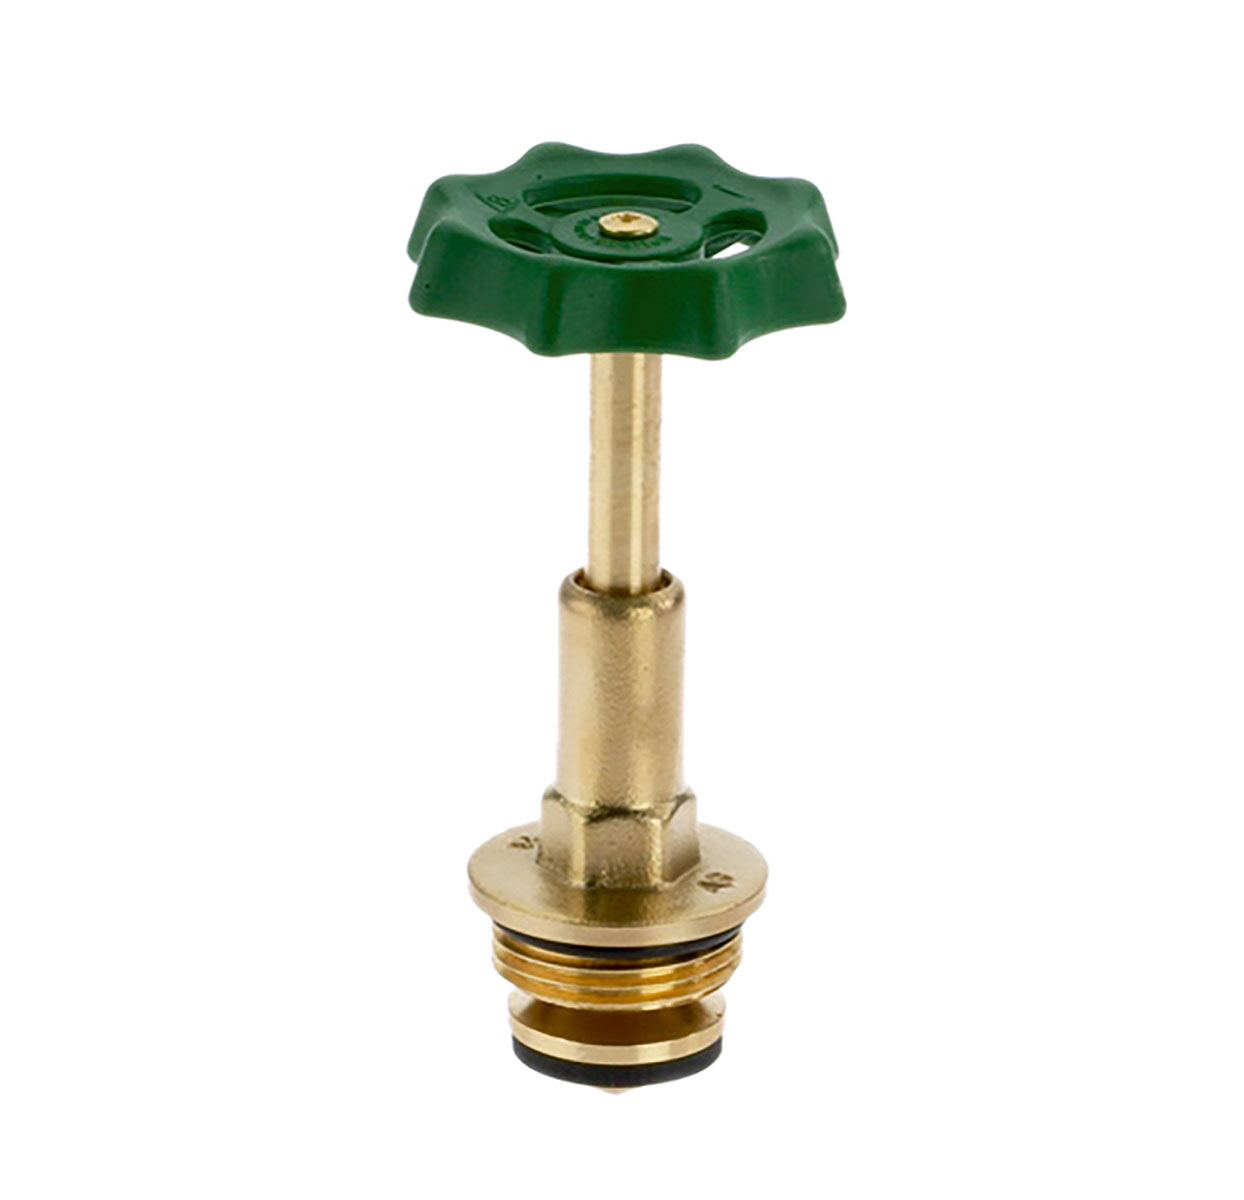 1212320 - Brass Upper-part with grease chamber for free-flow valves, rising spindle